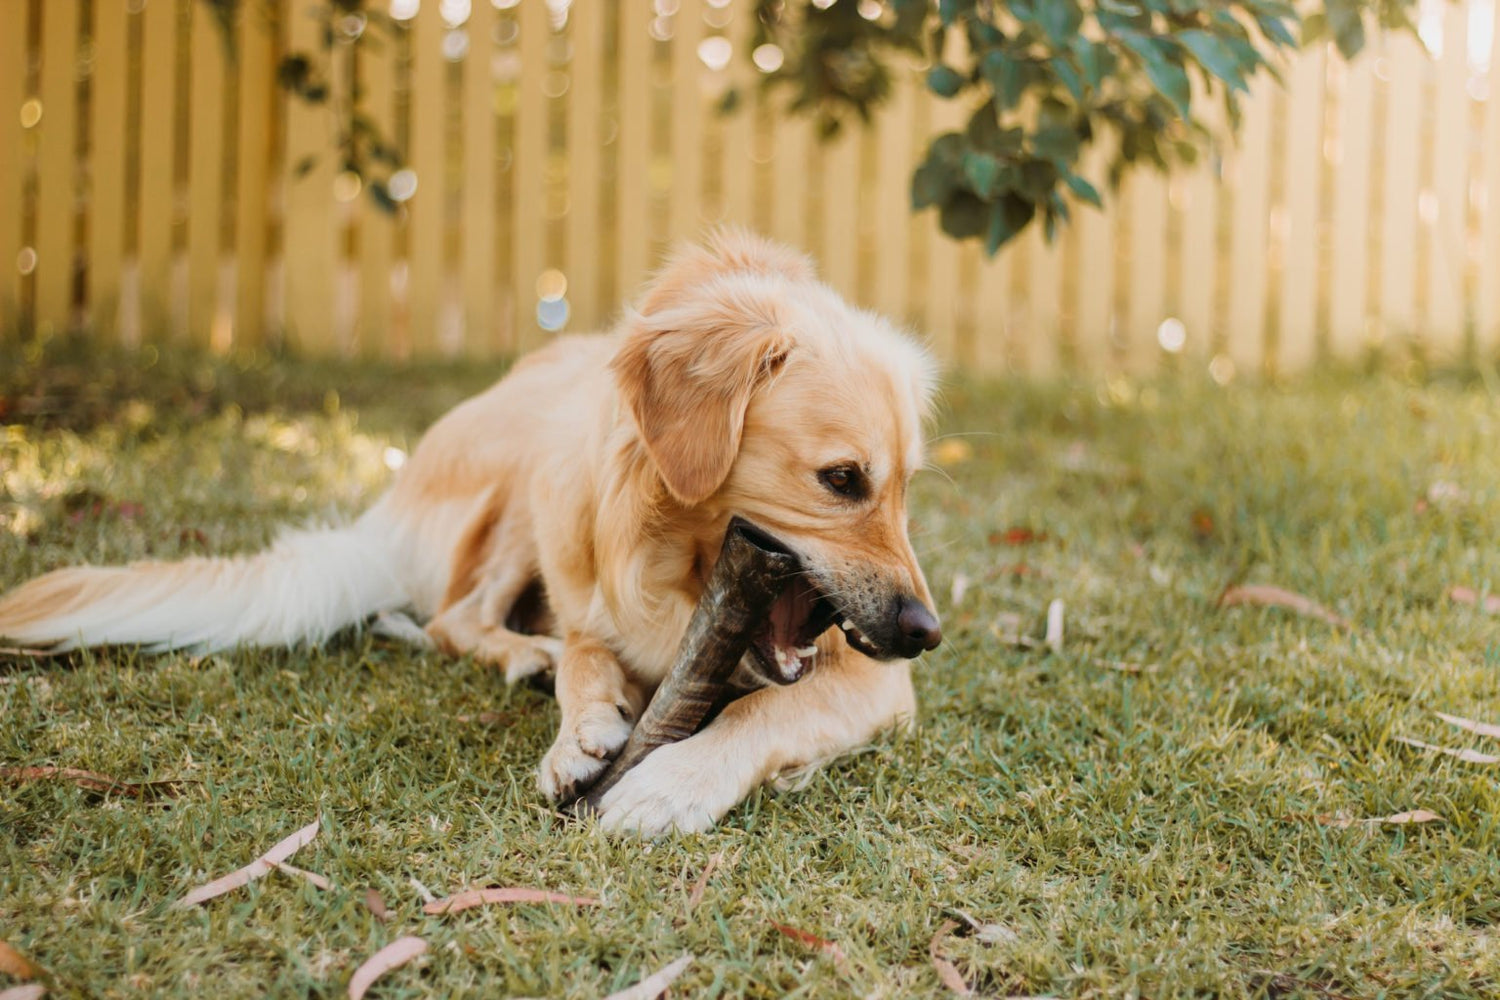 What are the best dog chews for your dog?